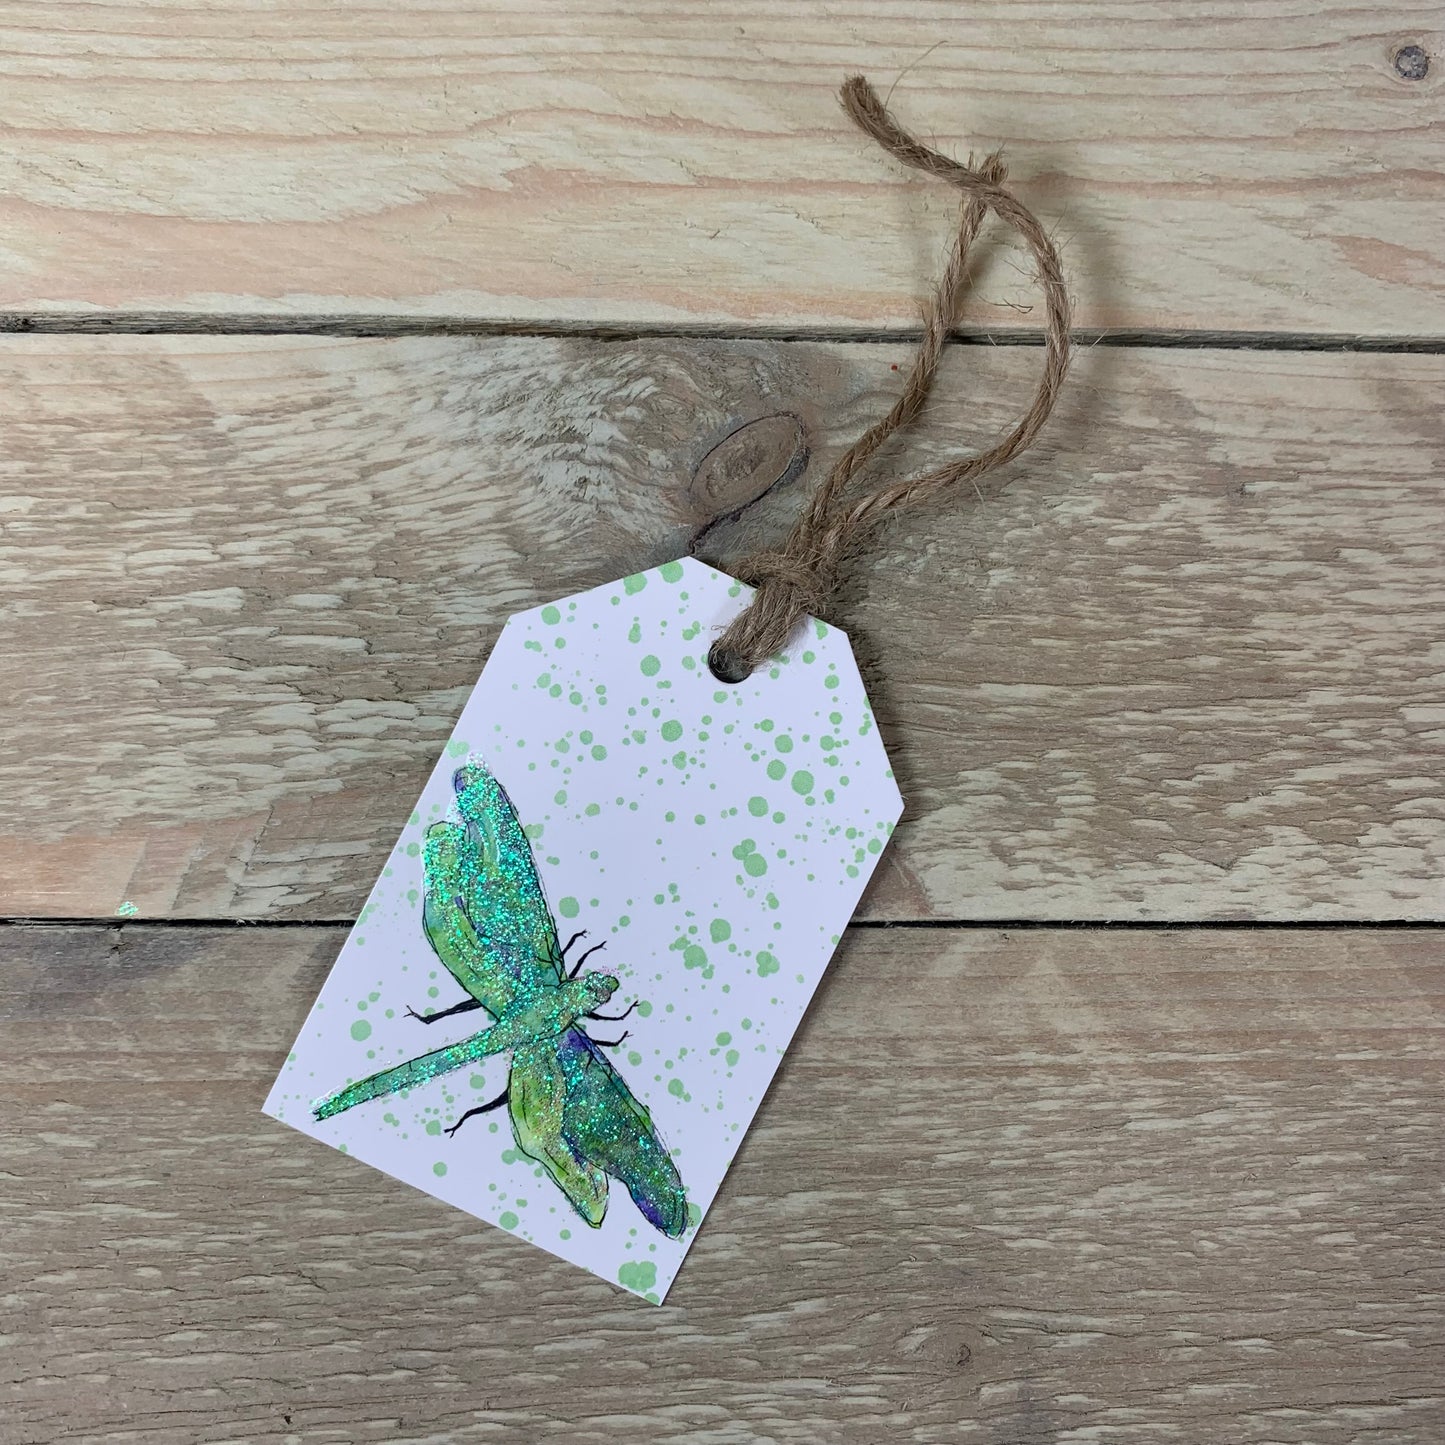 Dragonfly Gift Tags